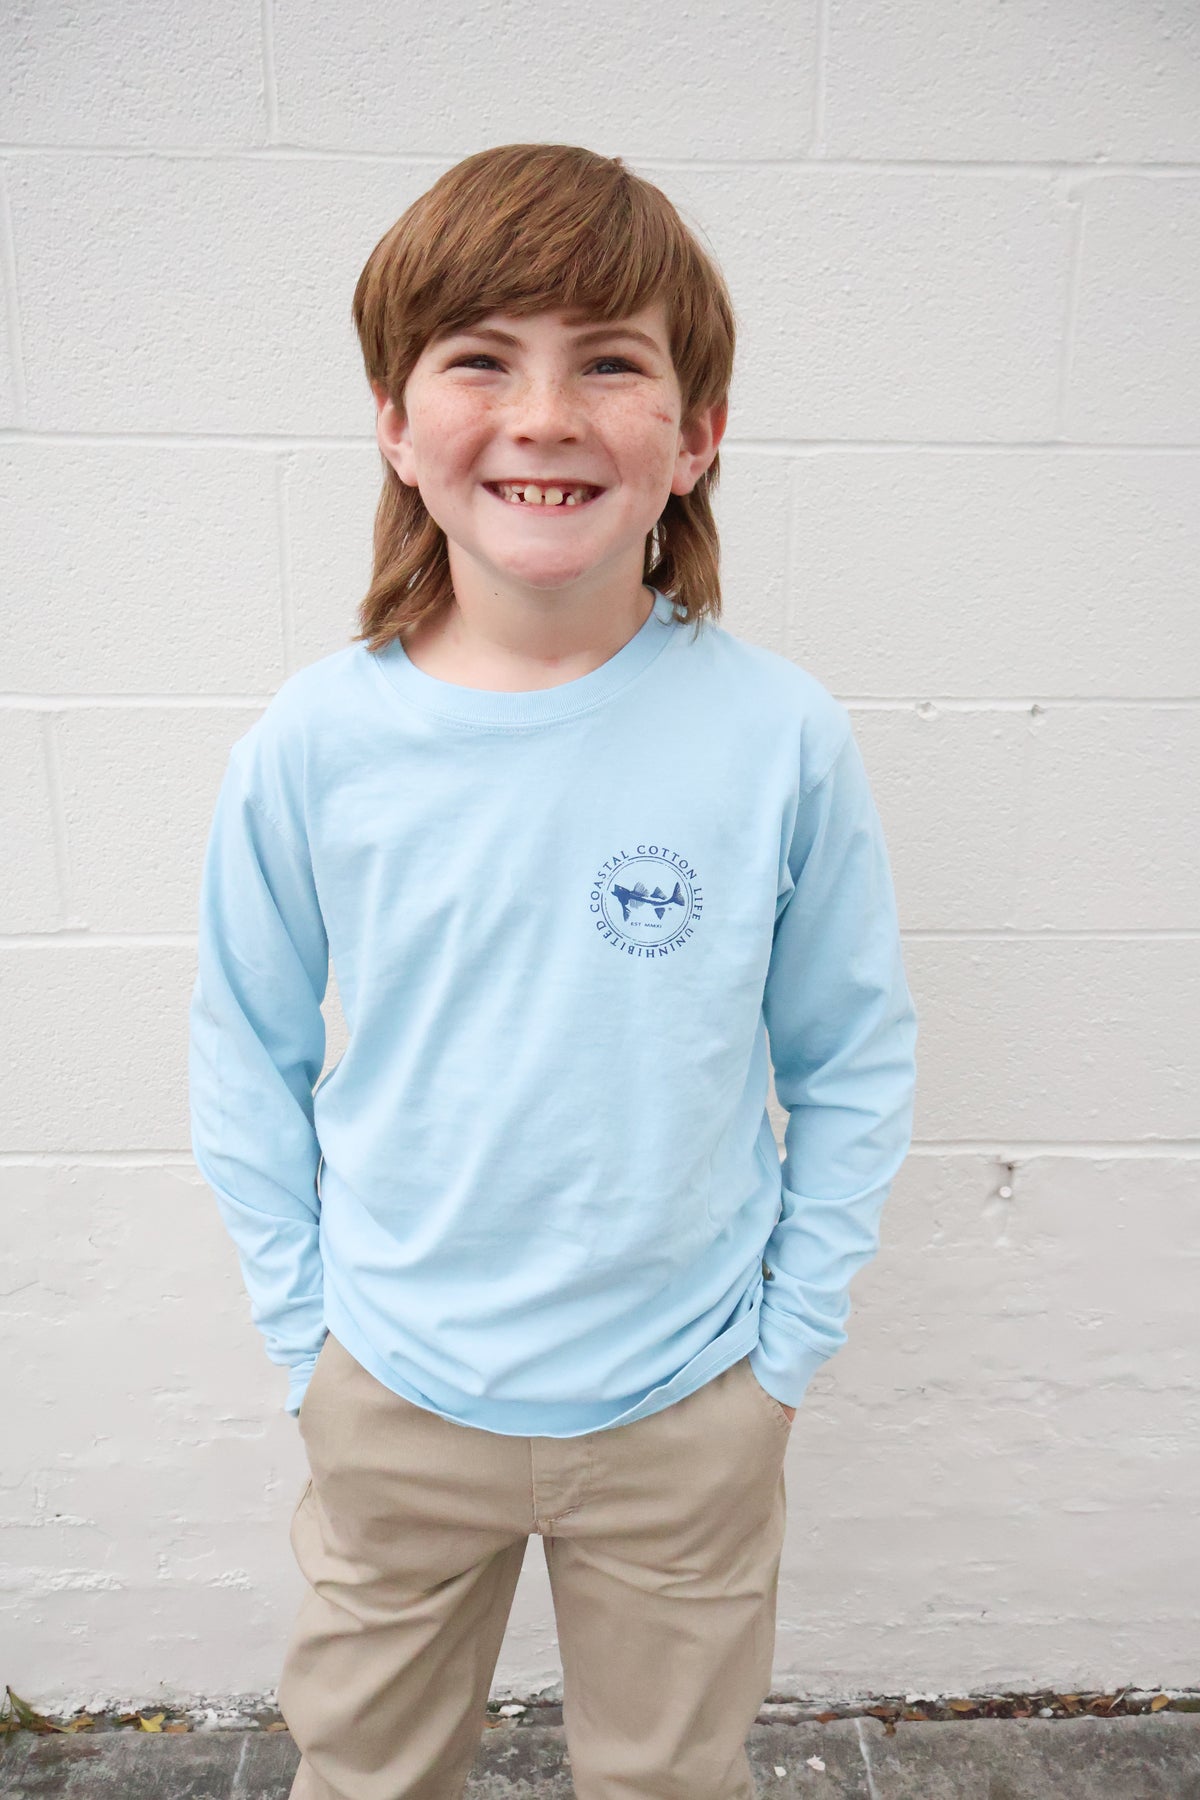 Youth Coastal Cotton Mutton Snapper Long Sleeve Tee